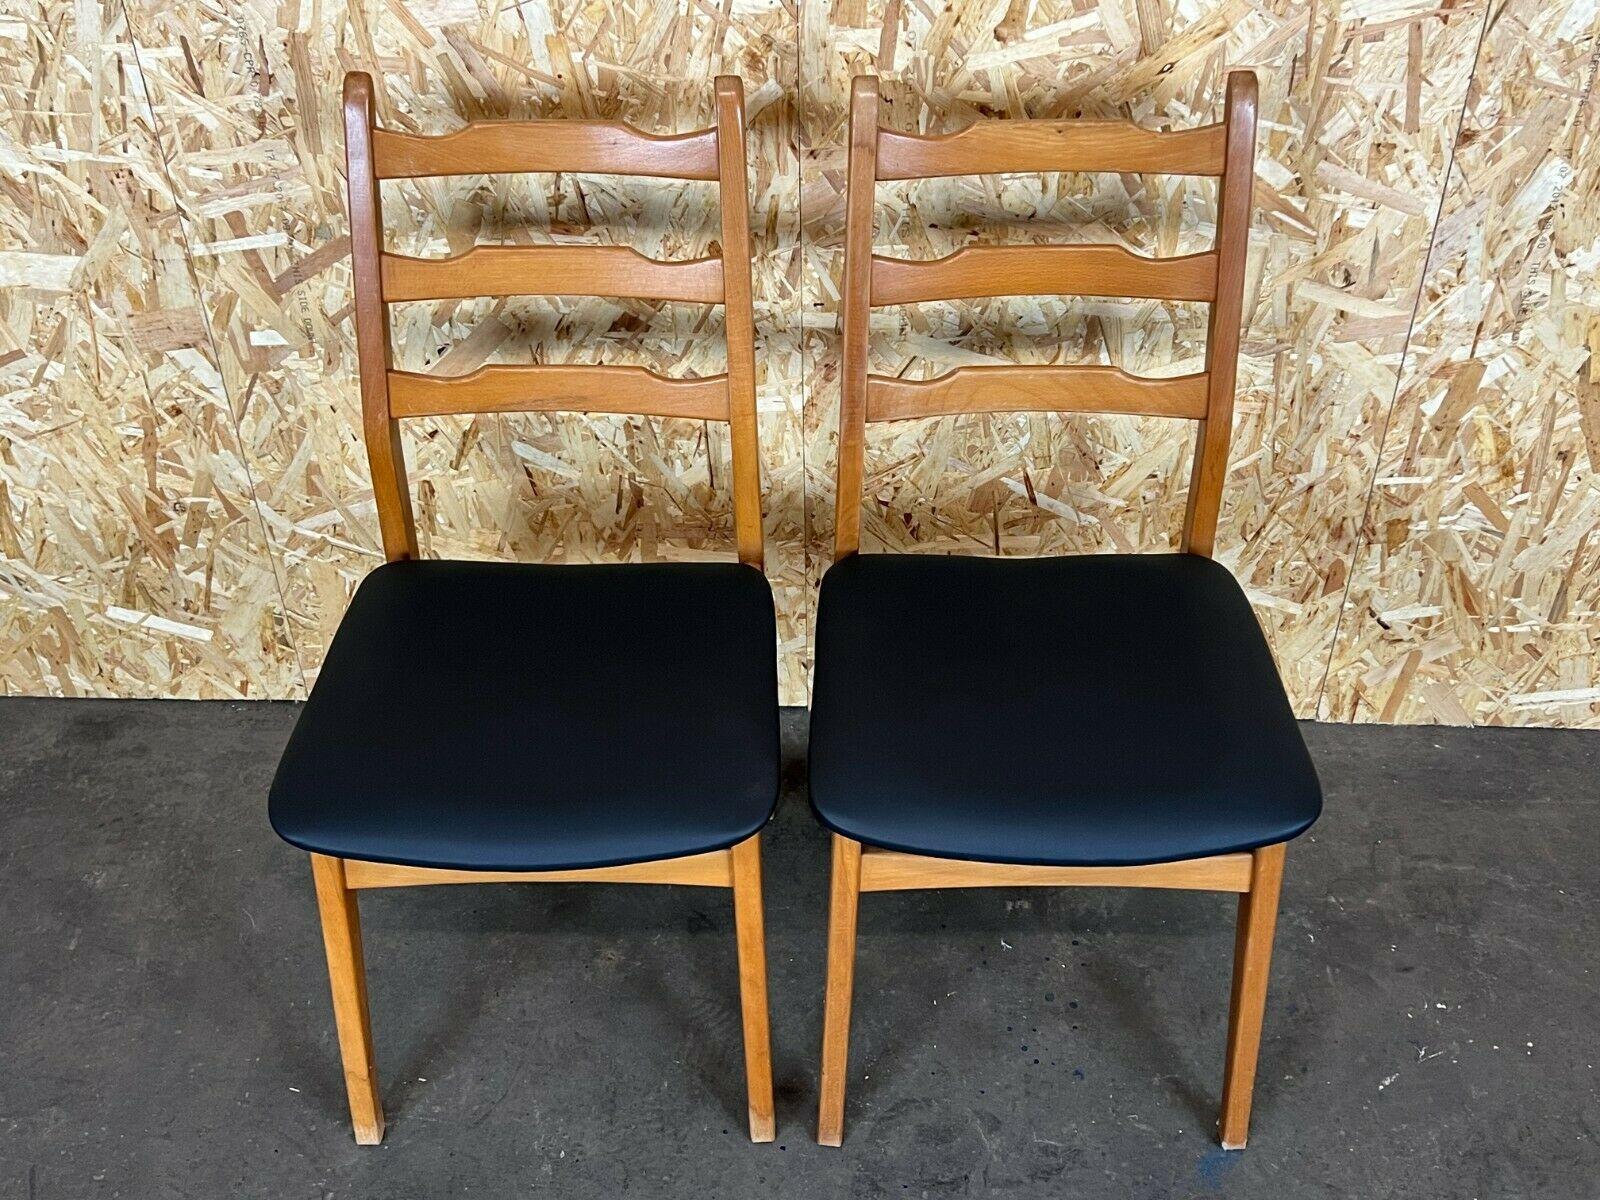 European 2x 70s Chairs Dining Chair Danish Upholstered Chair Mid Century Design For Sale